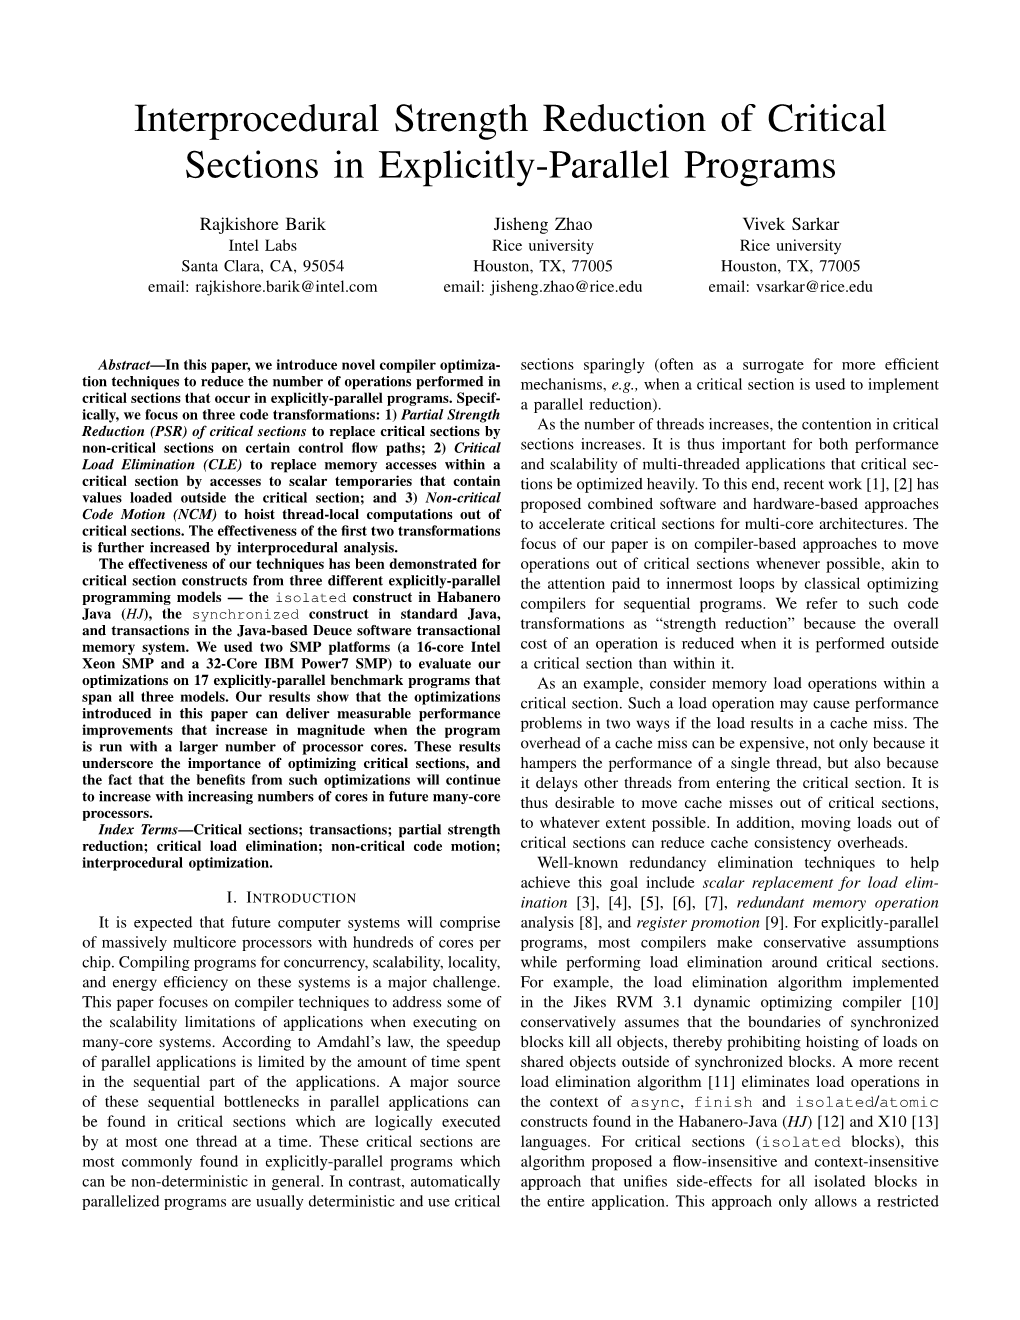 Interprocedural Strength Reduction of Critical Sections in Explicitly-Parallel Programs